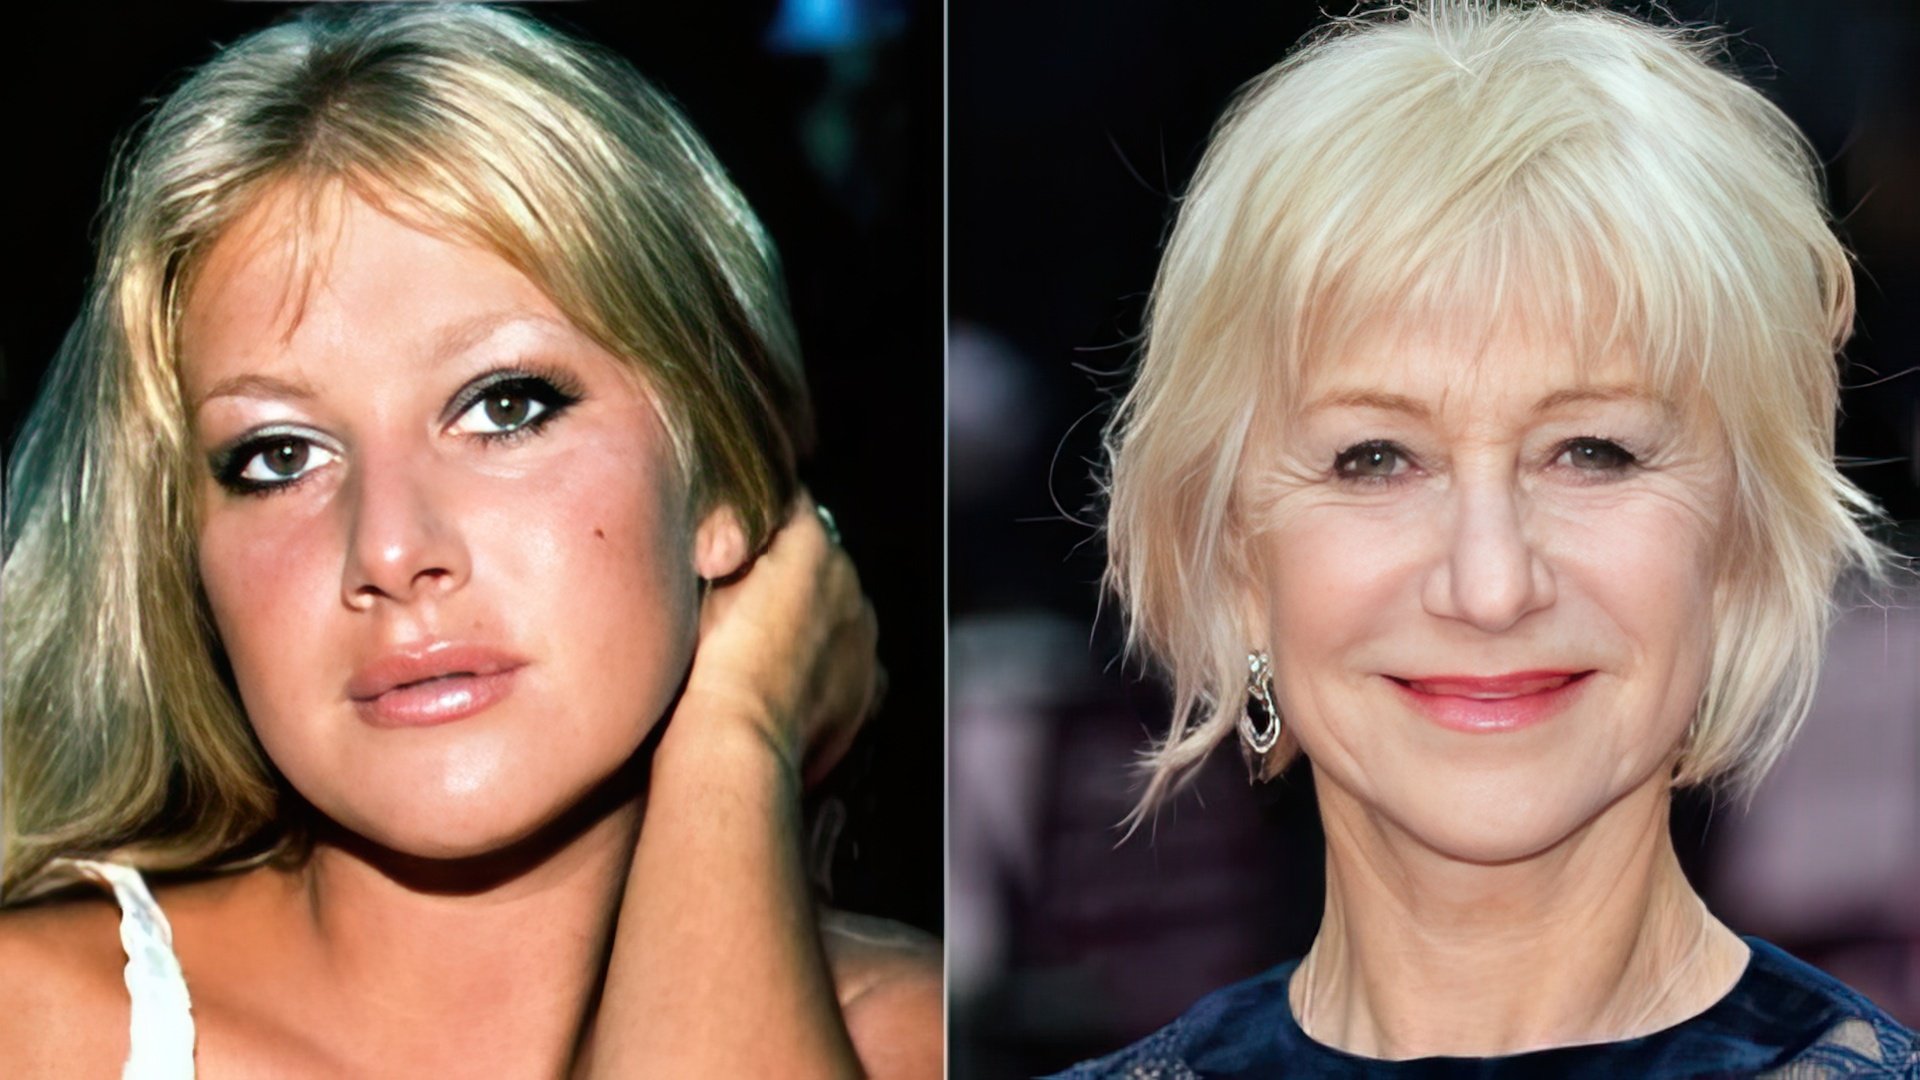 Helen Mirren in her youth and now